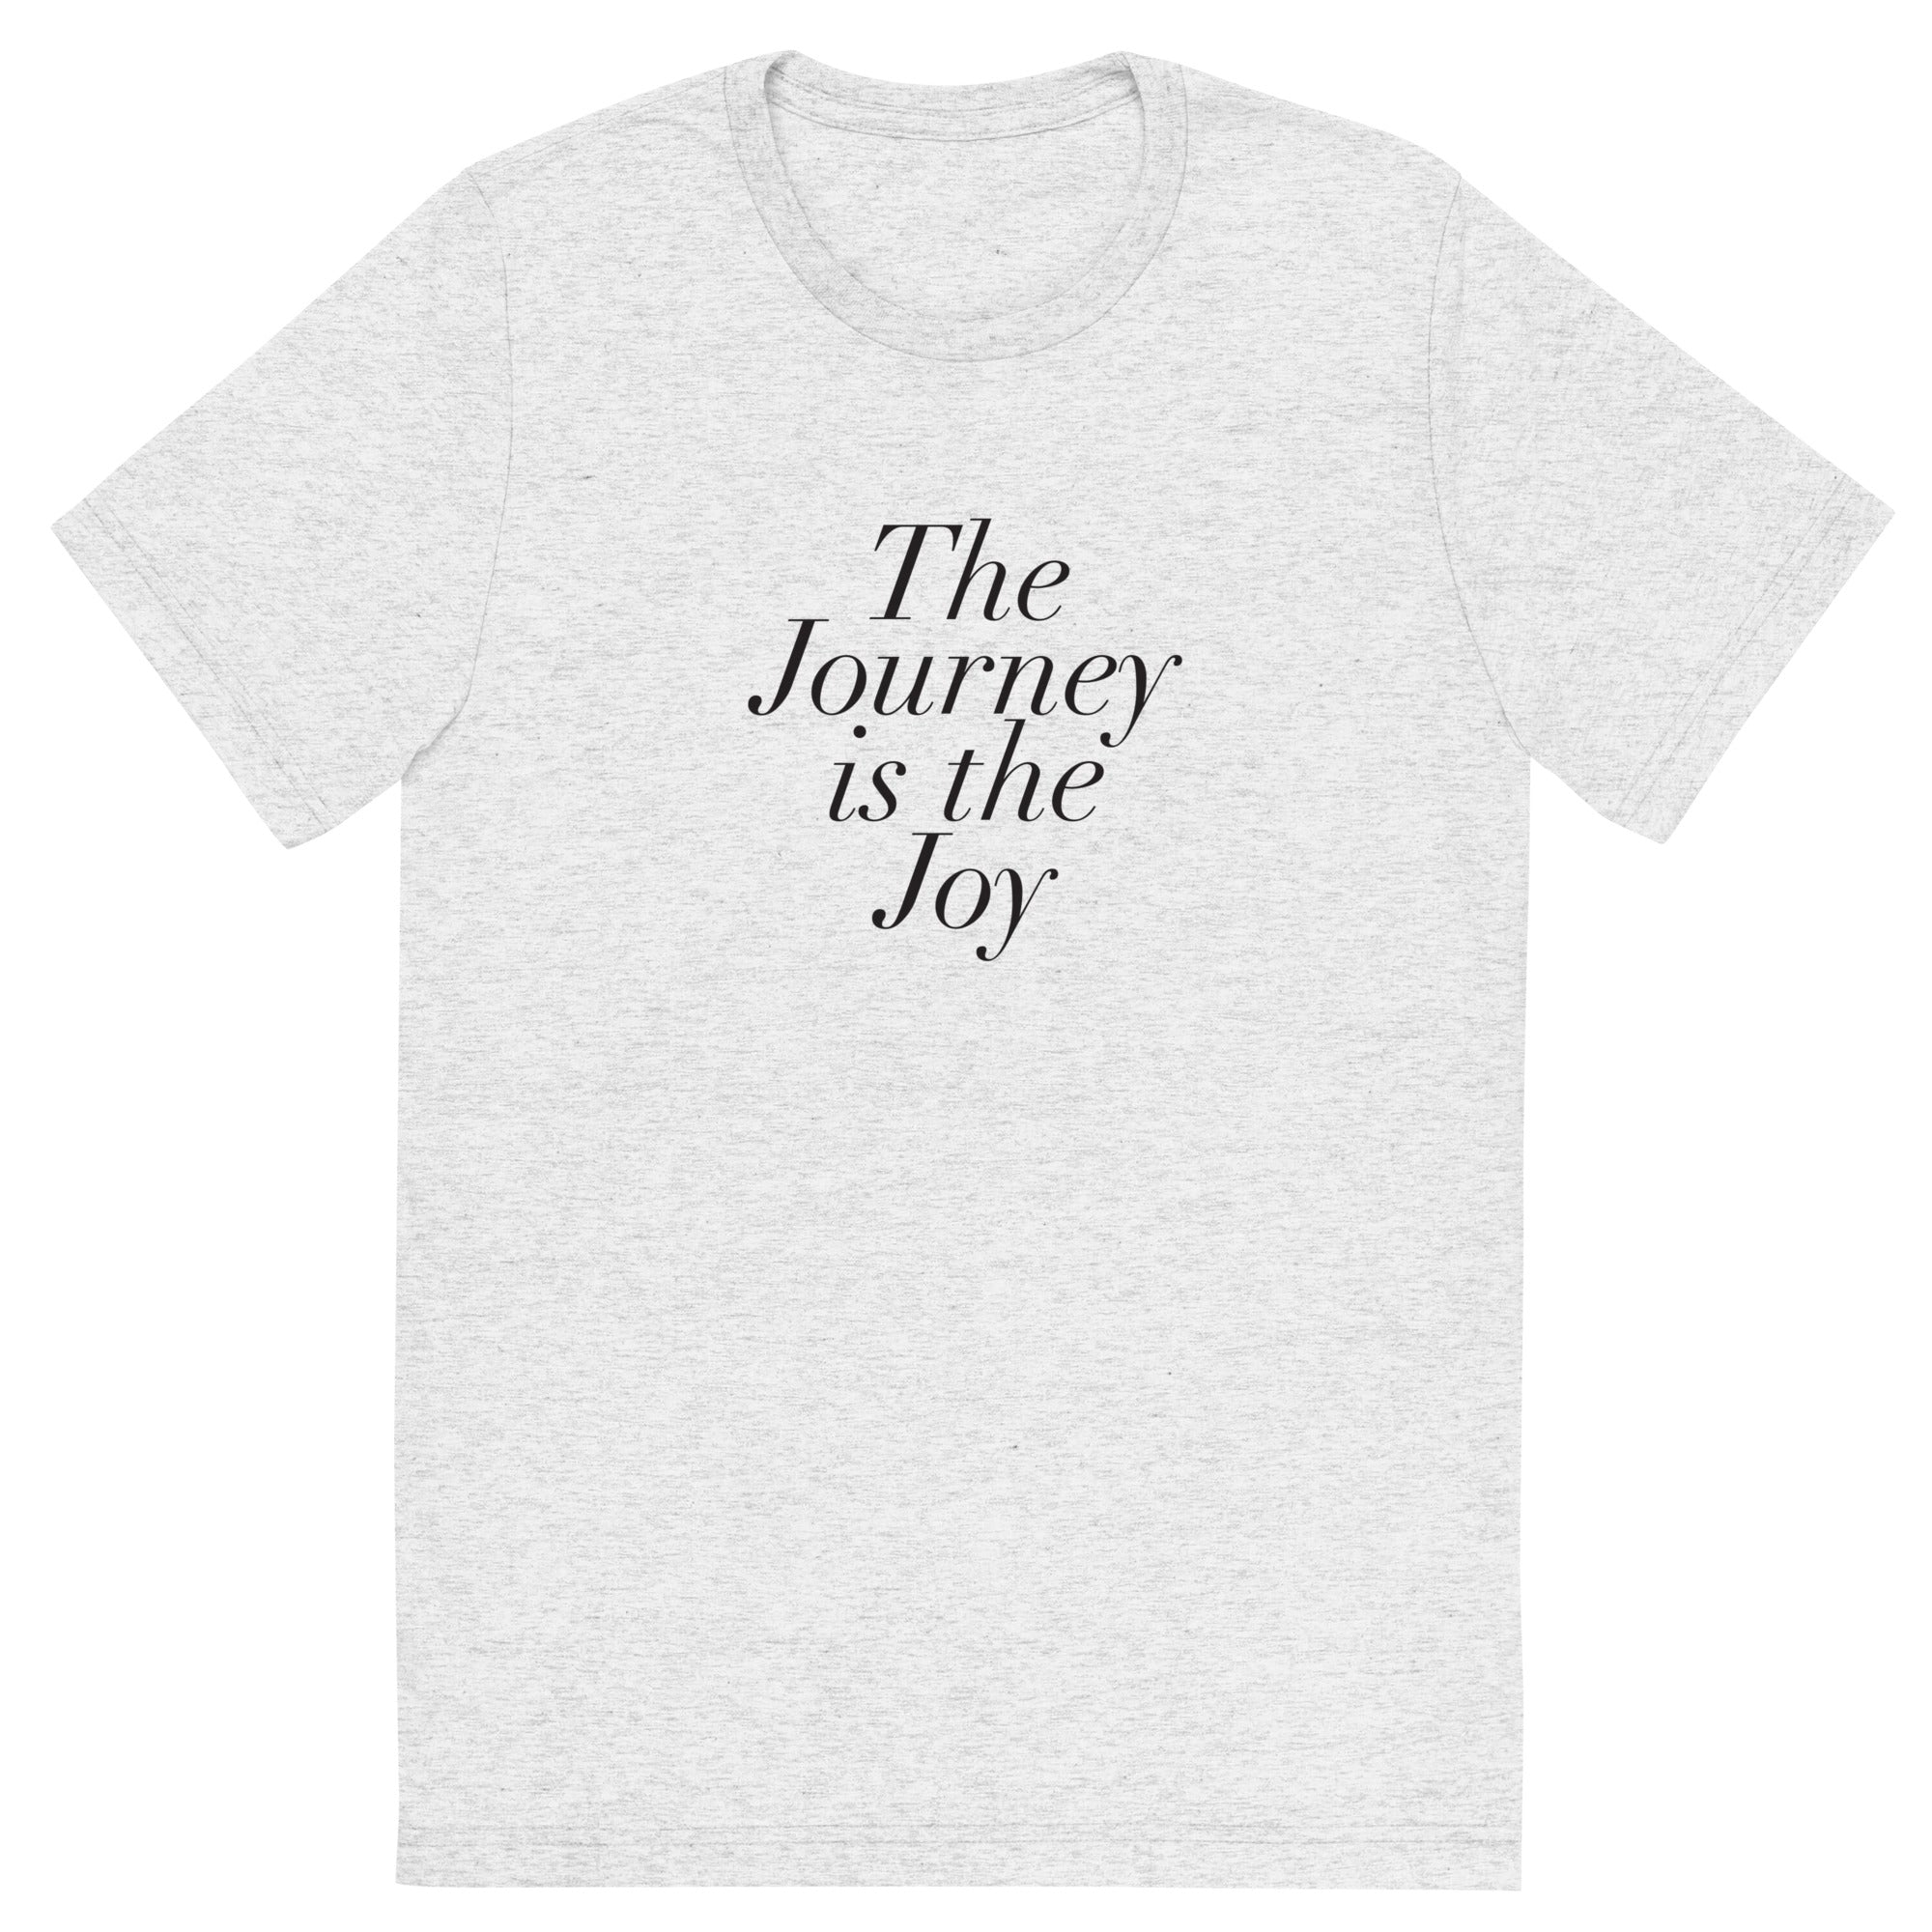 The Journey is the Joy - Unisex Short sleeve t-shirt in White Fleck and Pure White